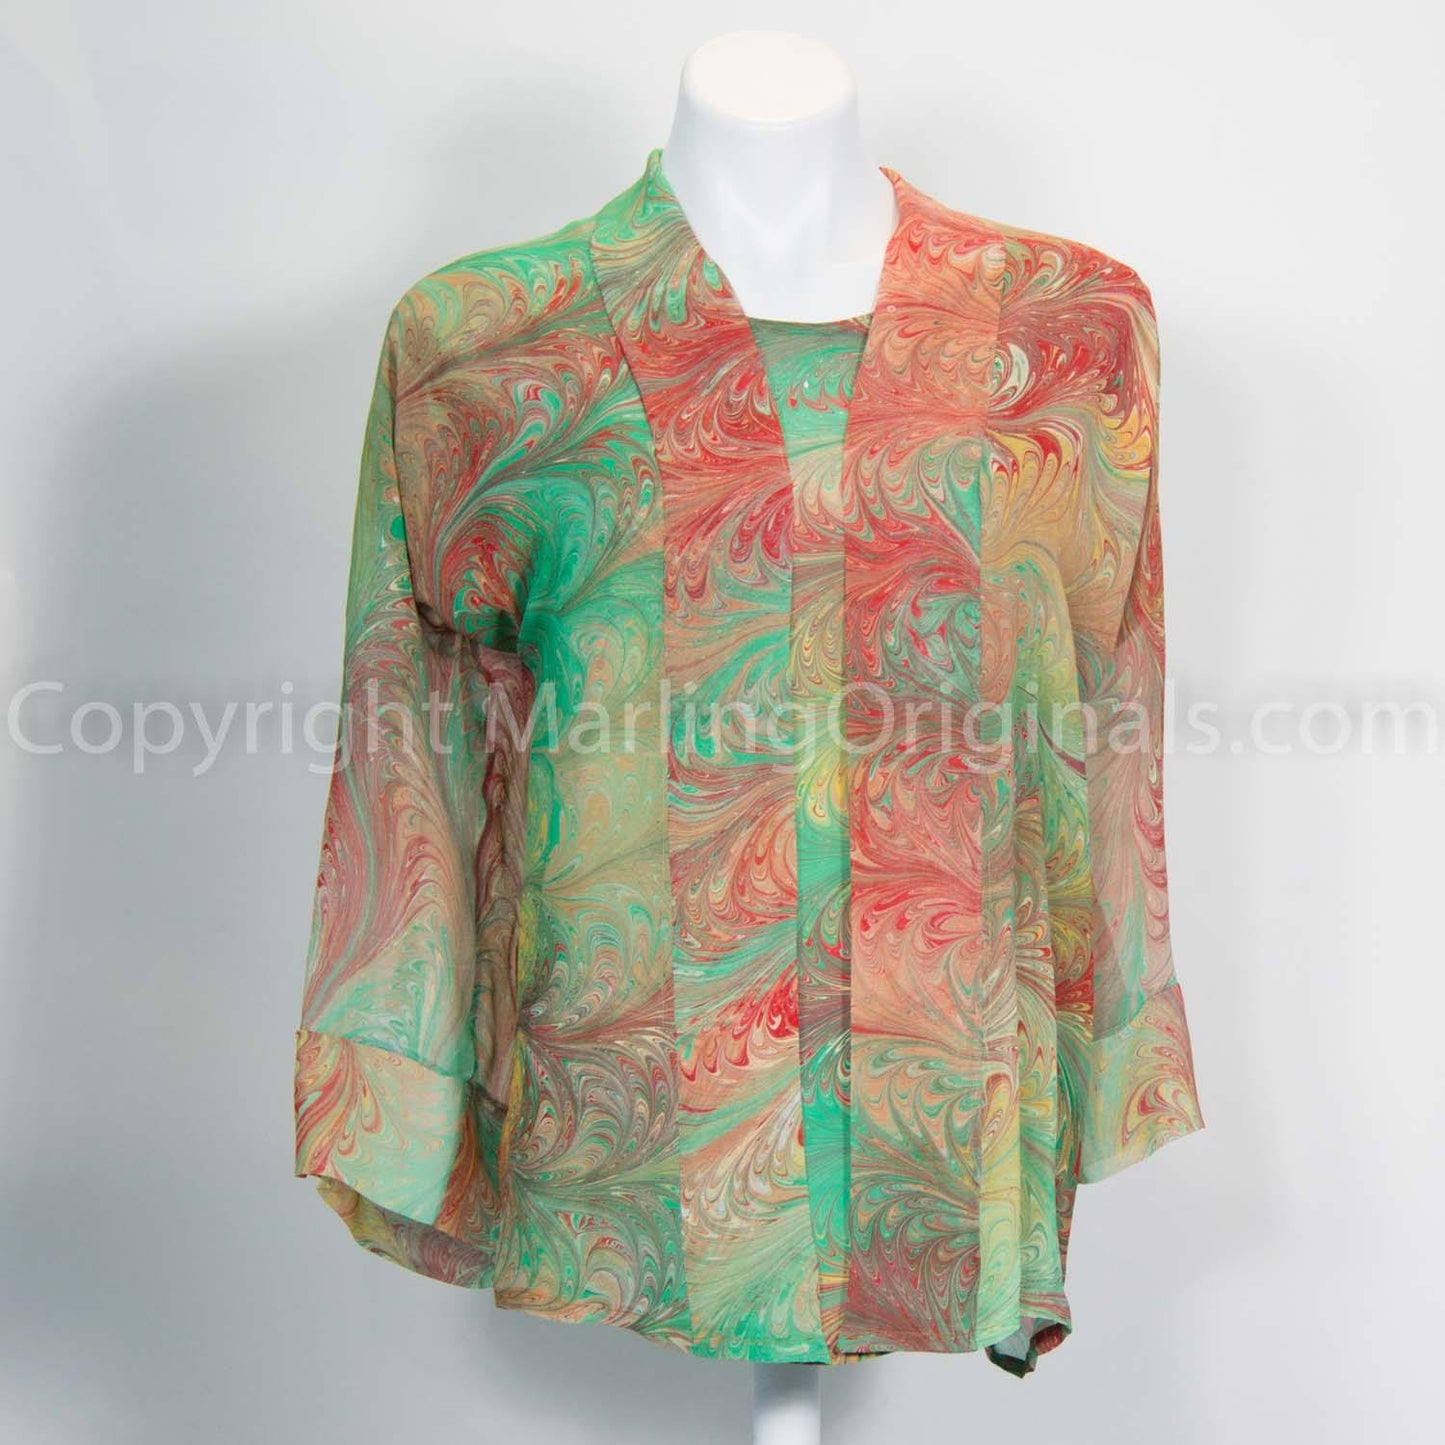 Hand marbled silk kimono shown with matching silk top.  Spring green with sienna, red, gold tones.